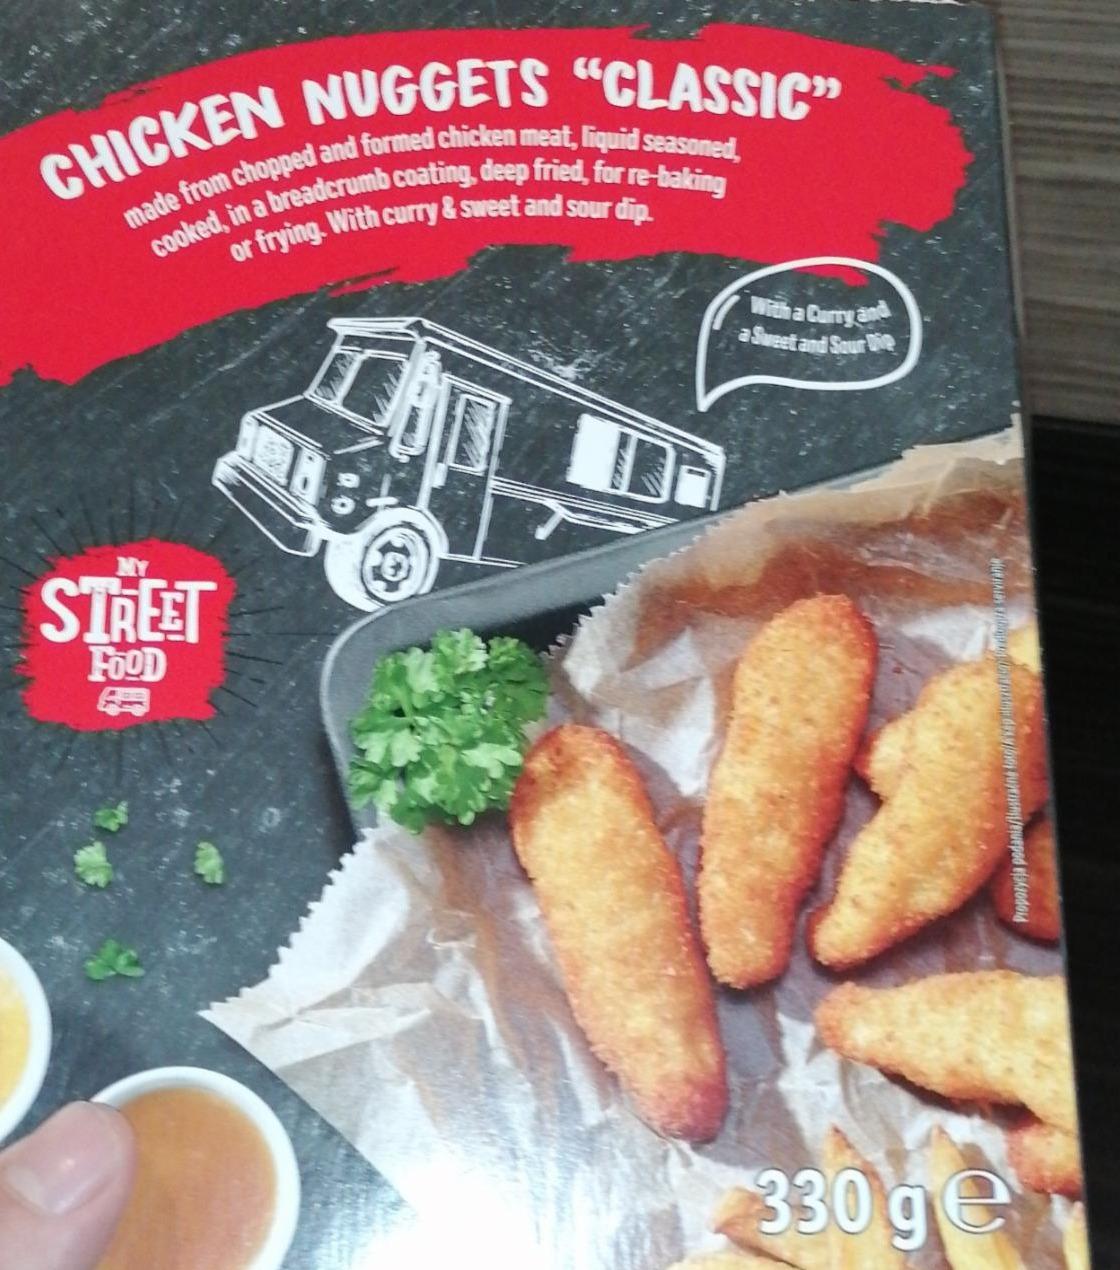 Fotografie - Chicken nuggets classic My street food Lidl